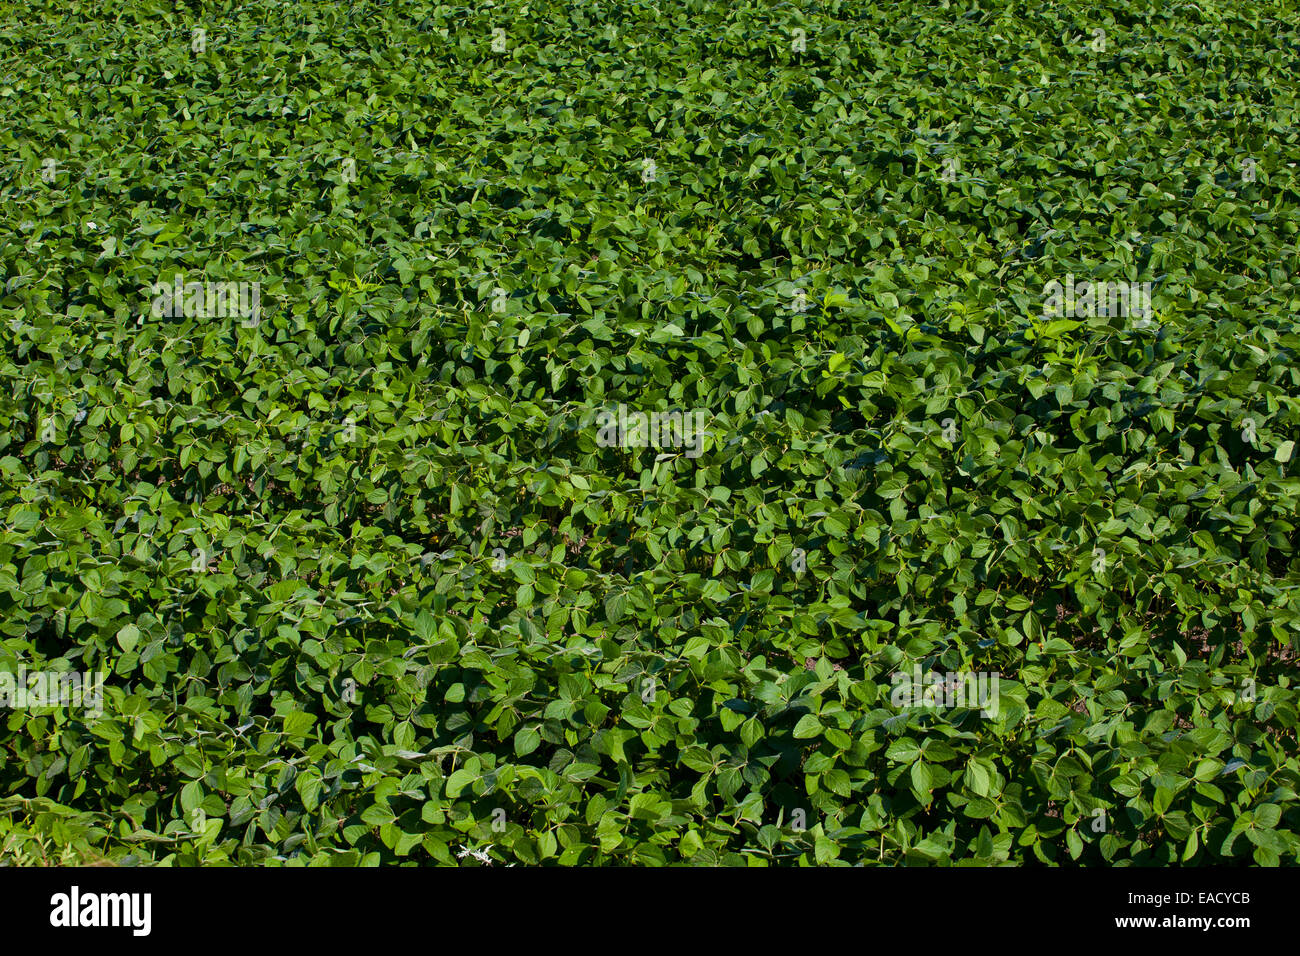 Soy field, Compton, Eastern Townships, Quebec Province, Canada Stock Photo